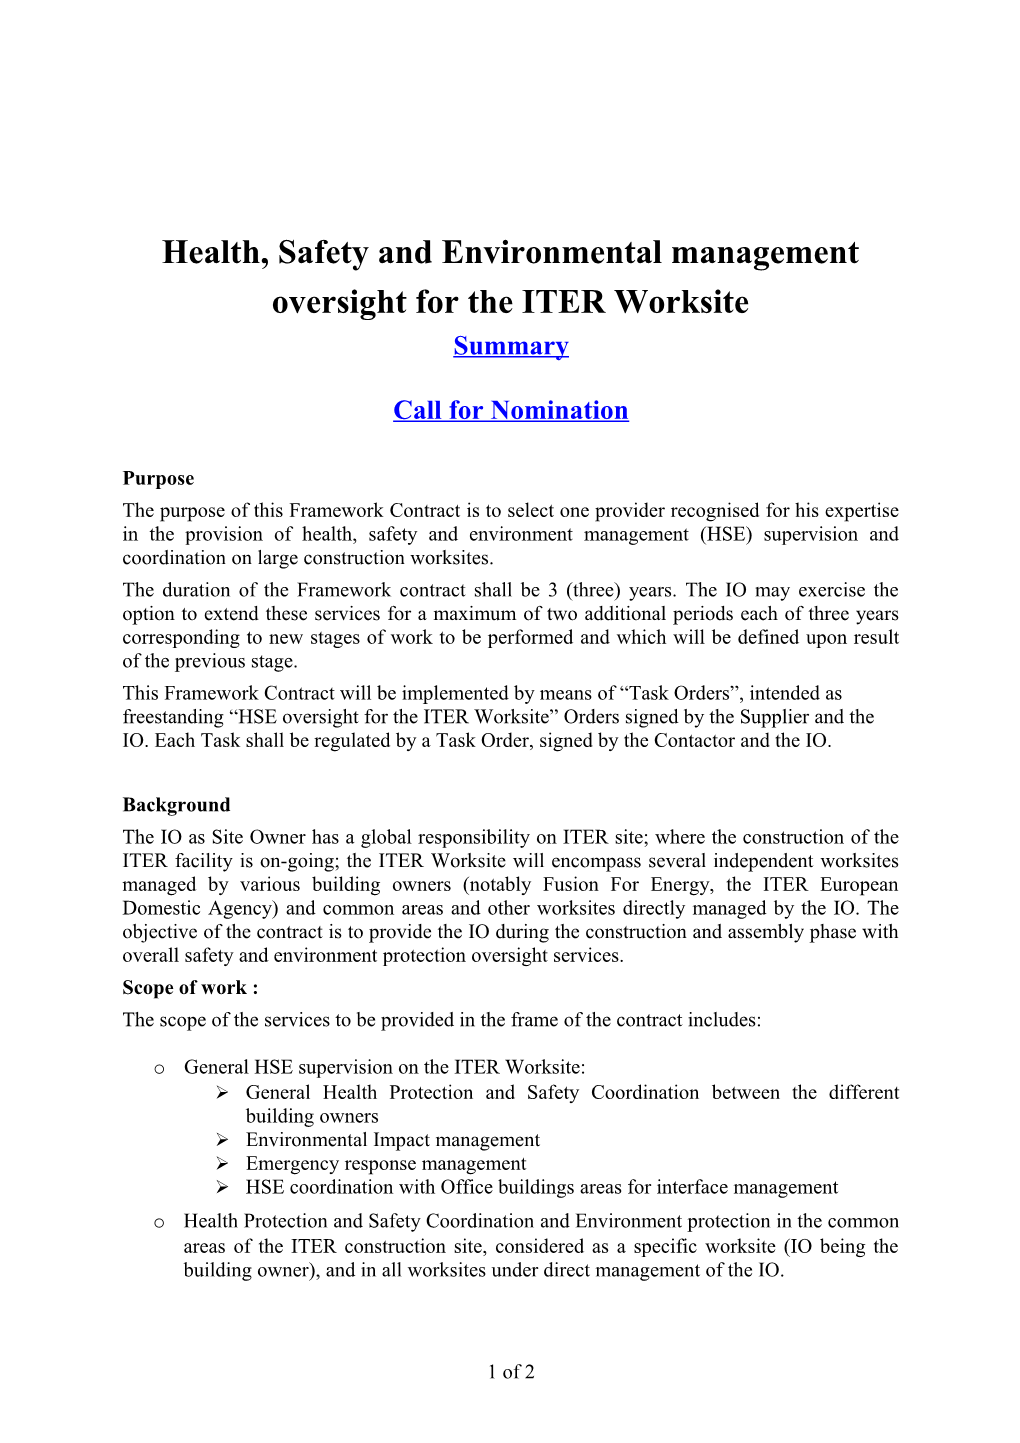 Health, Safety and Environmental Management